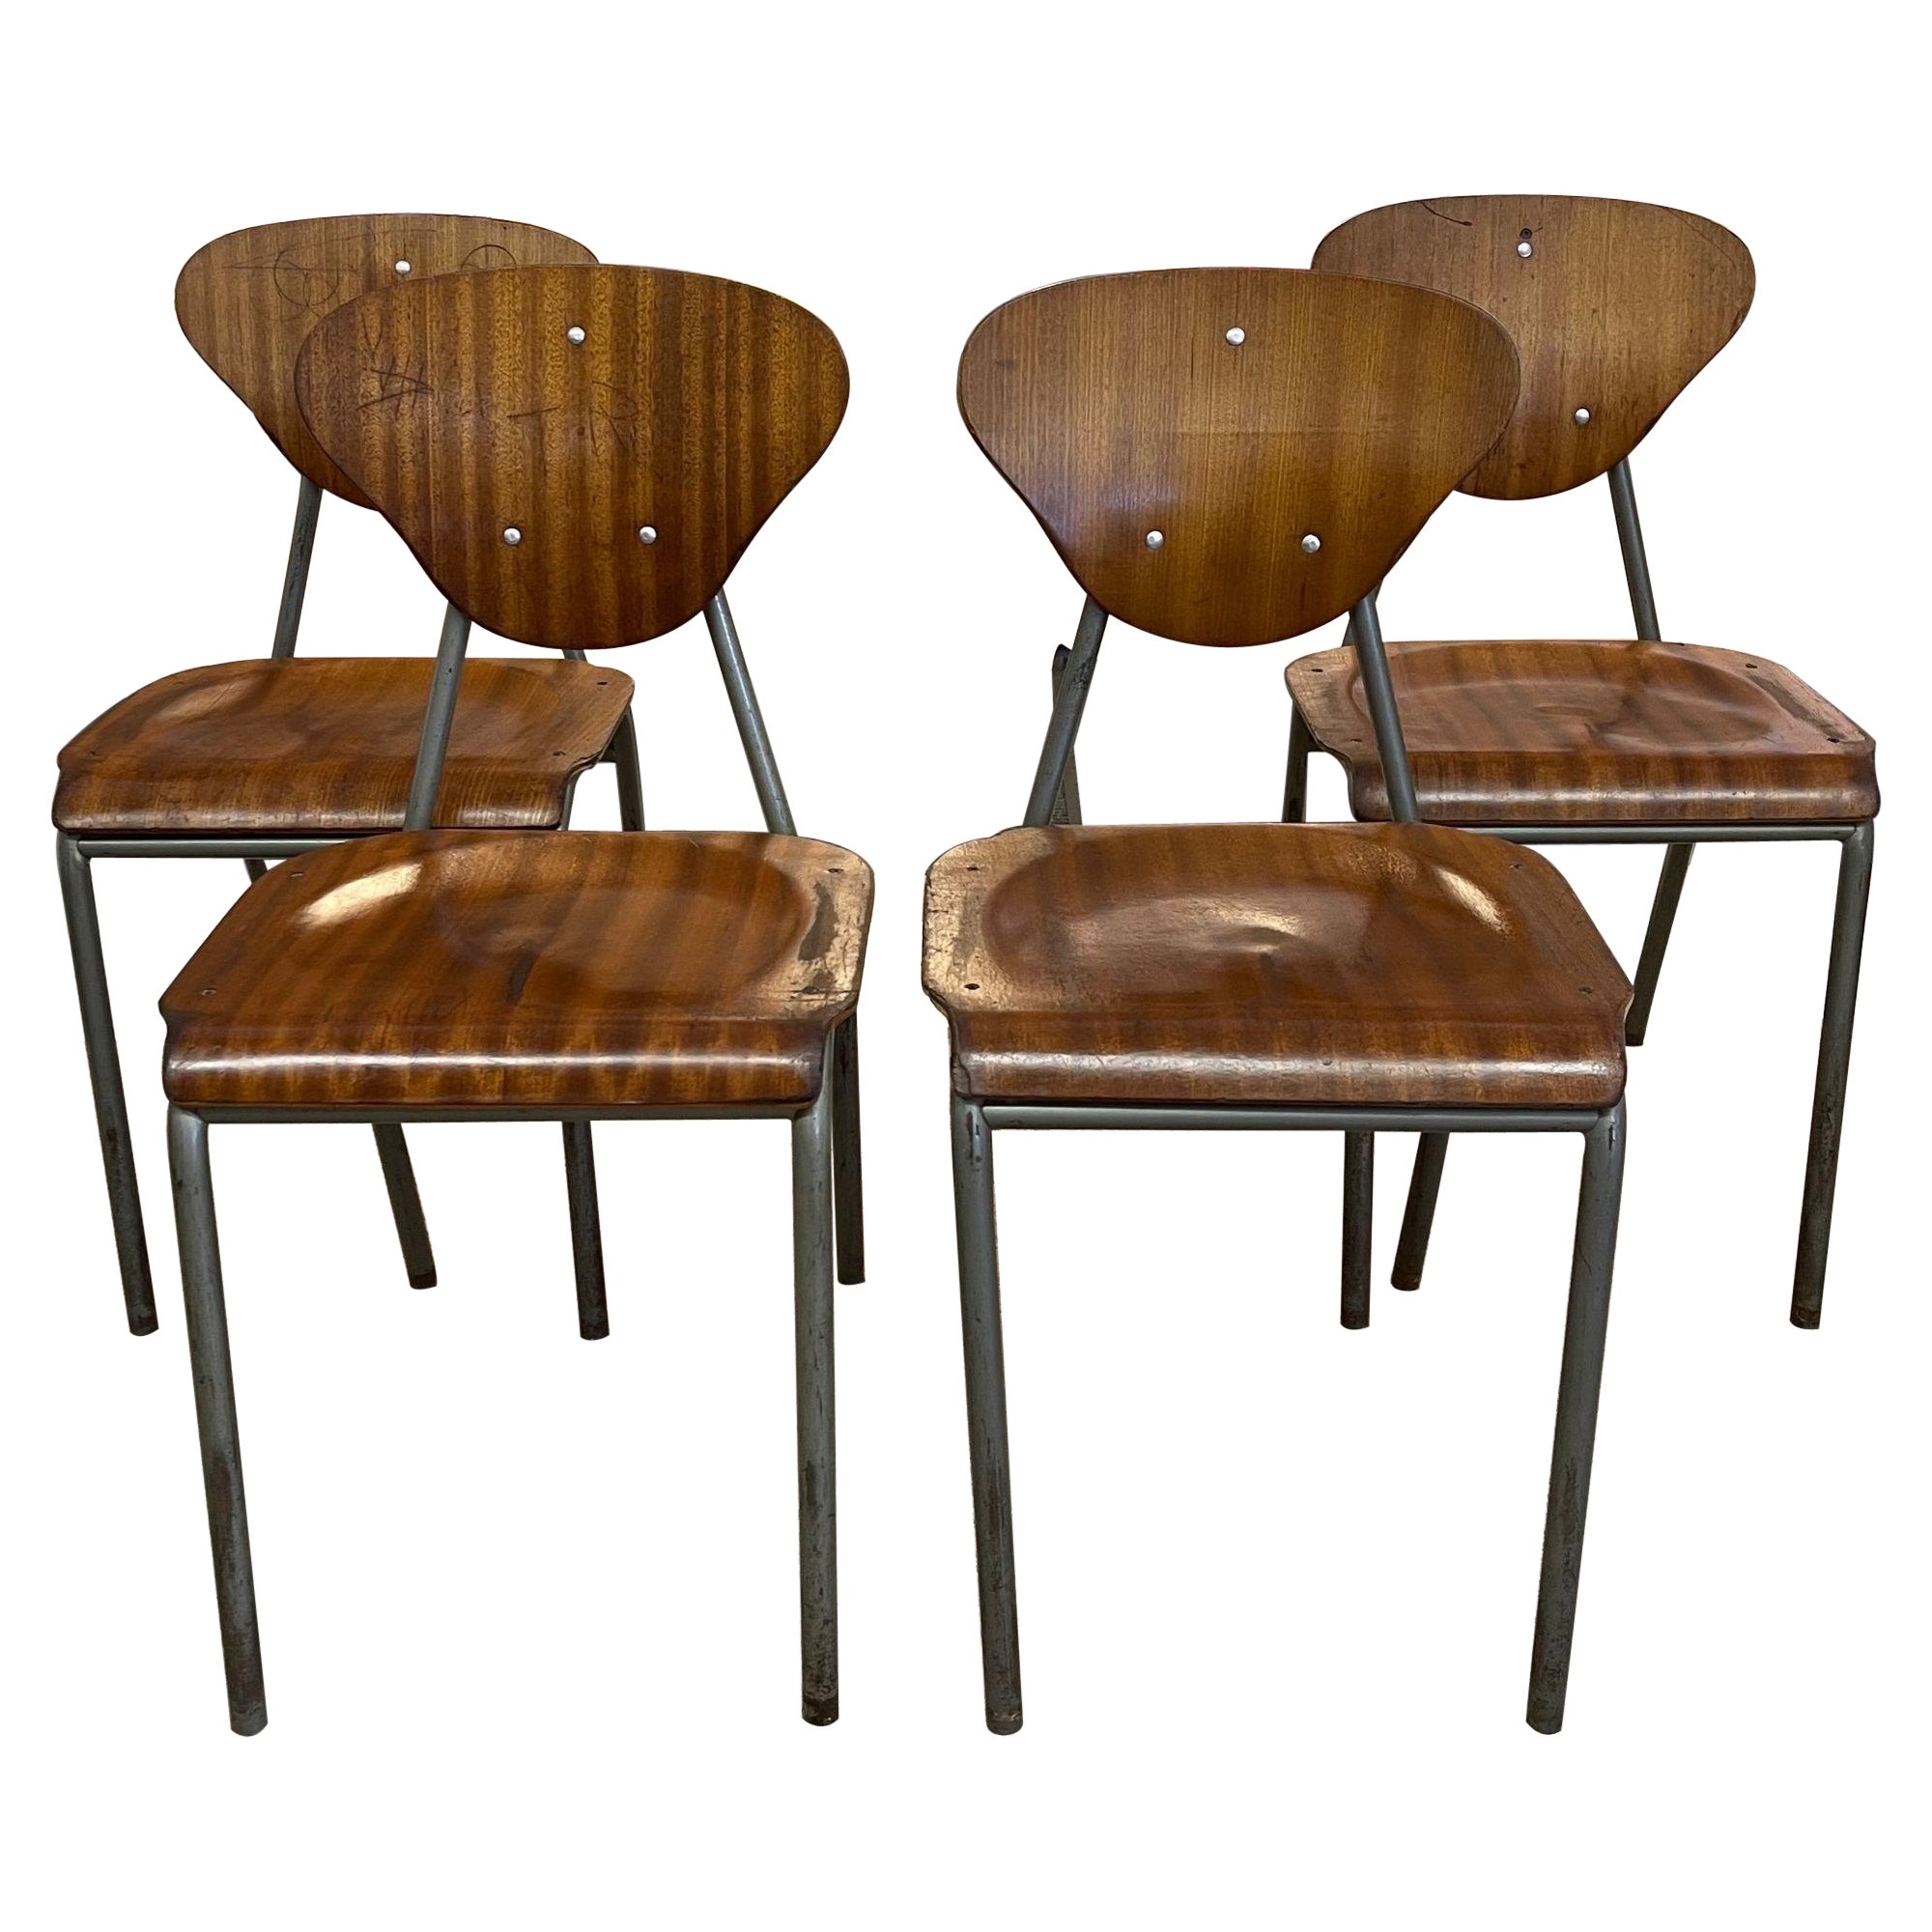 Vintage Danish Modern Chairs With Metal Frame. Set of 4. For Sale